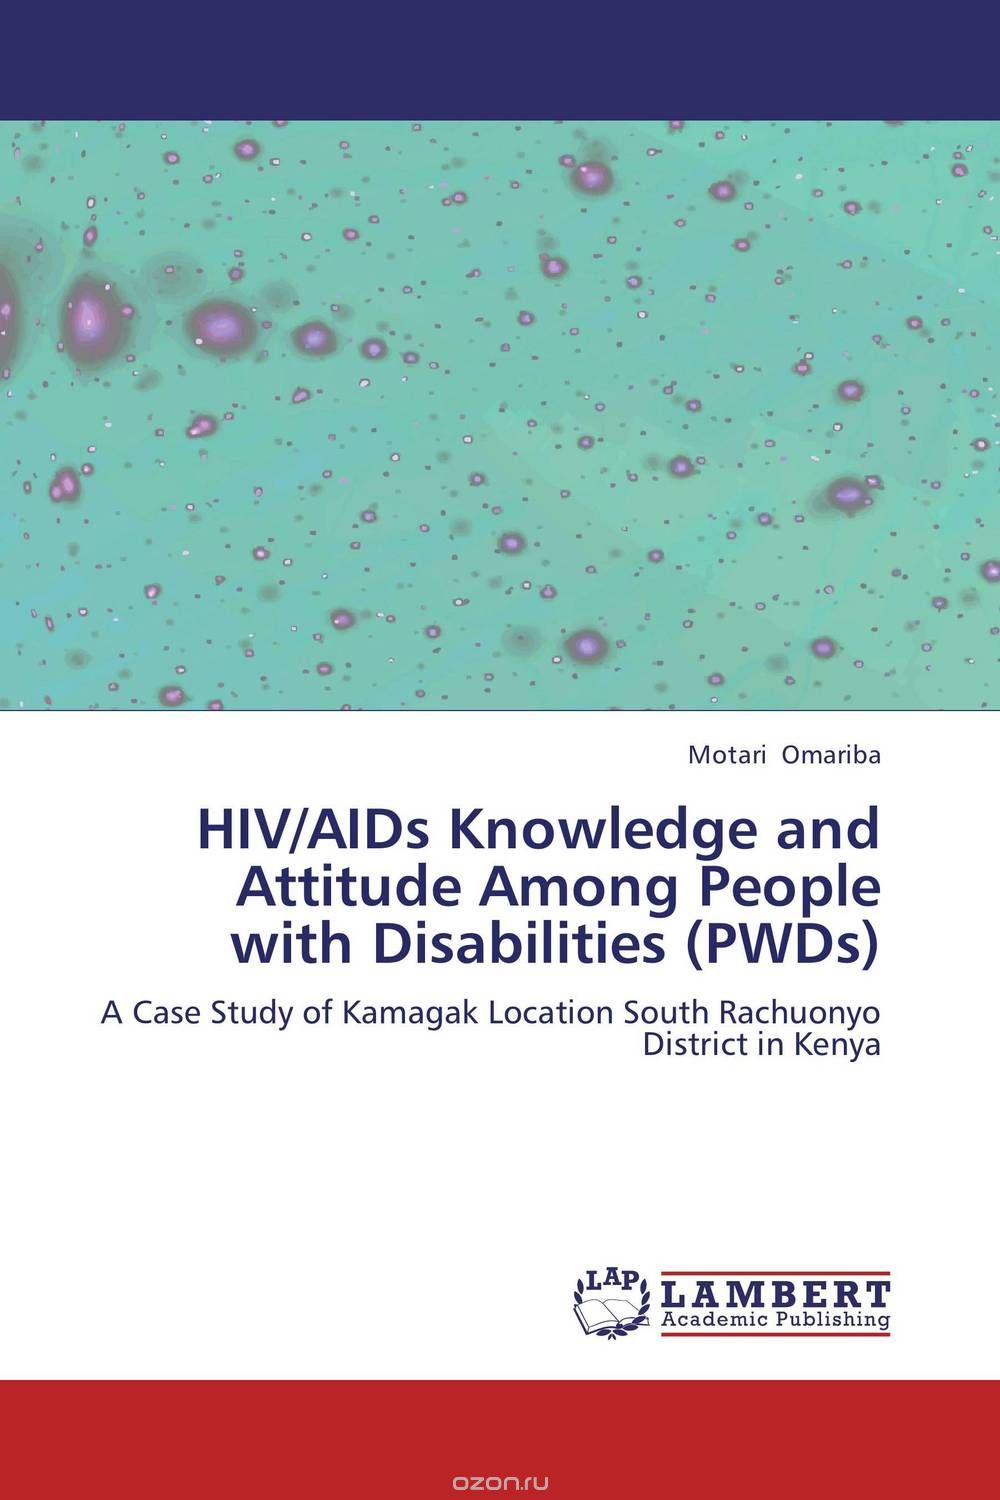 Скачать книгу "HIV/AIDs Knowledge and Attitude Among People with Disabilities (PWDs)"